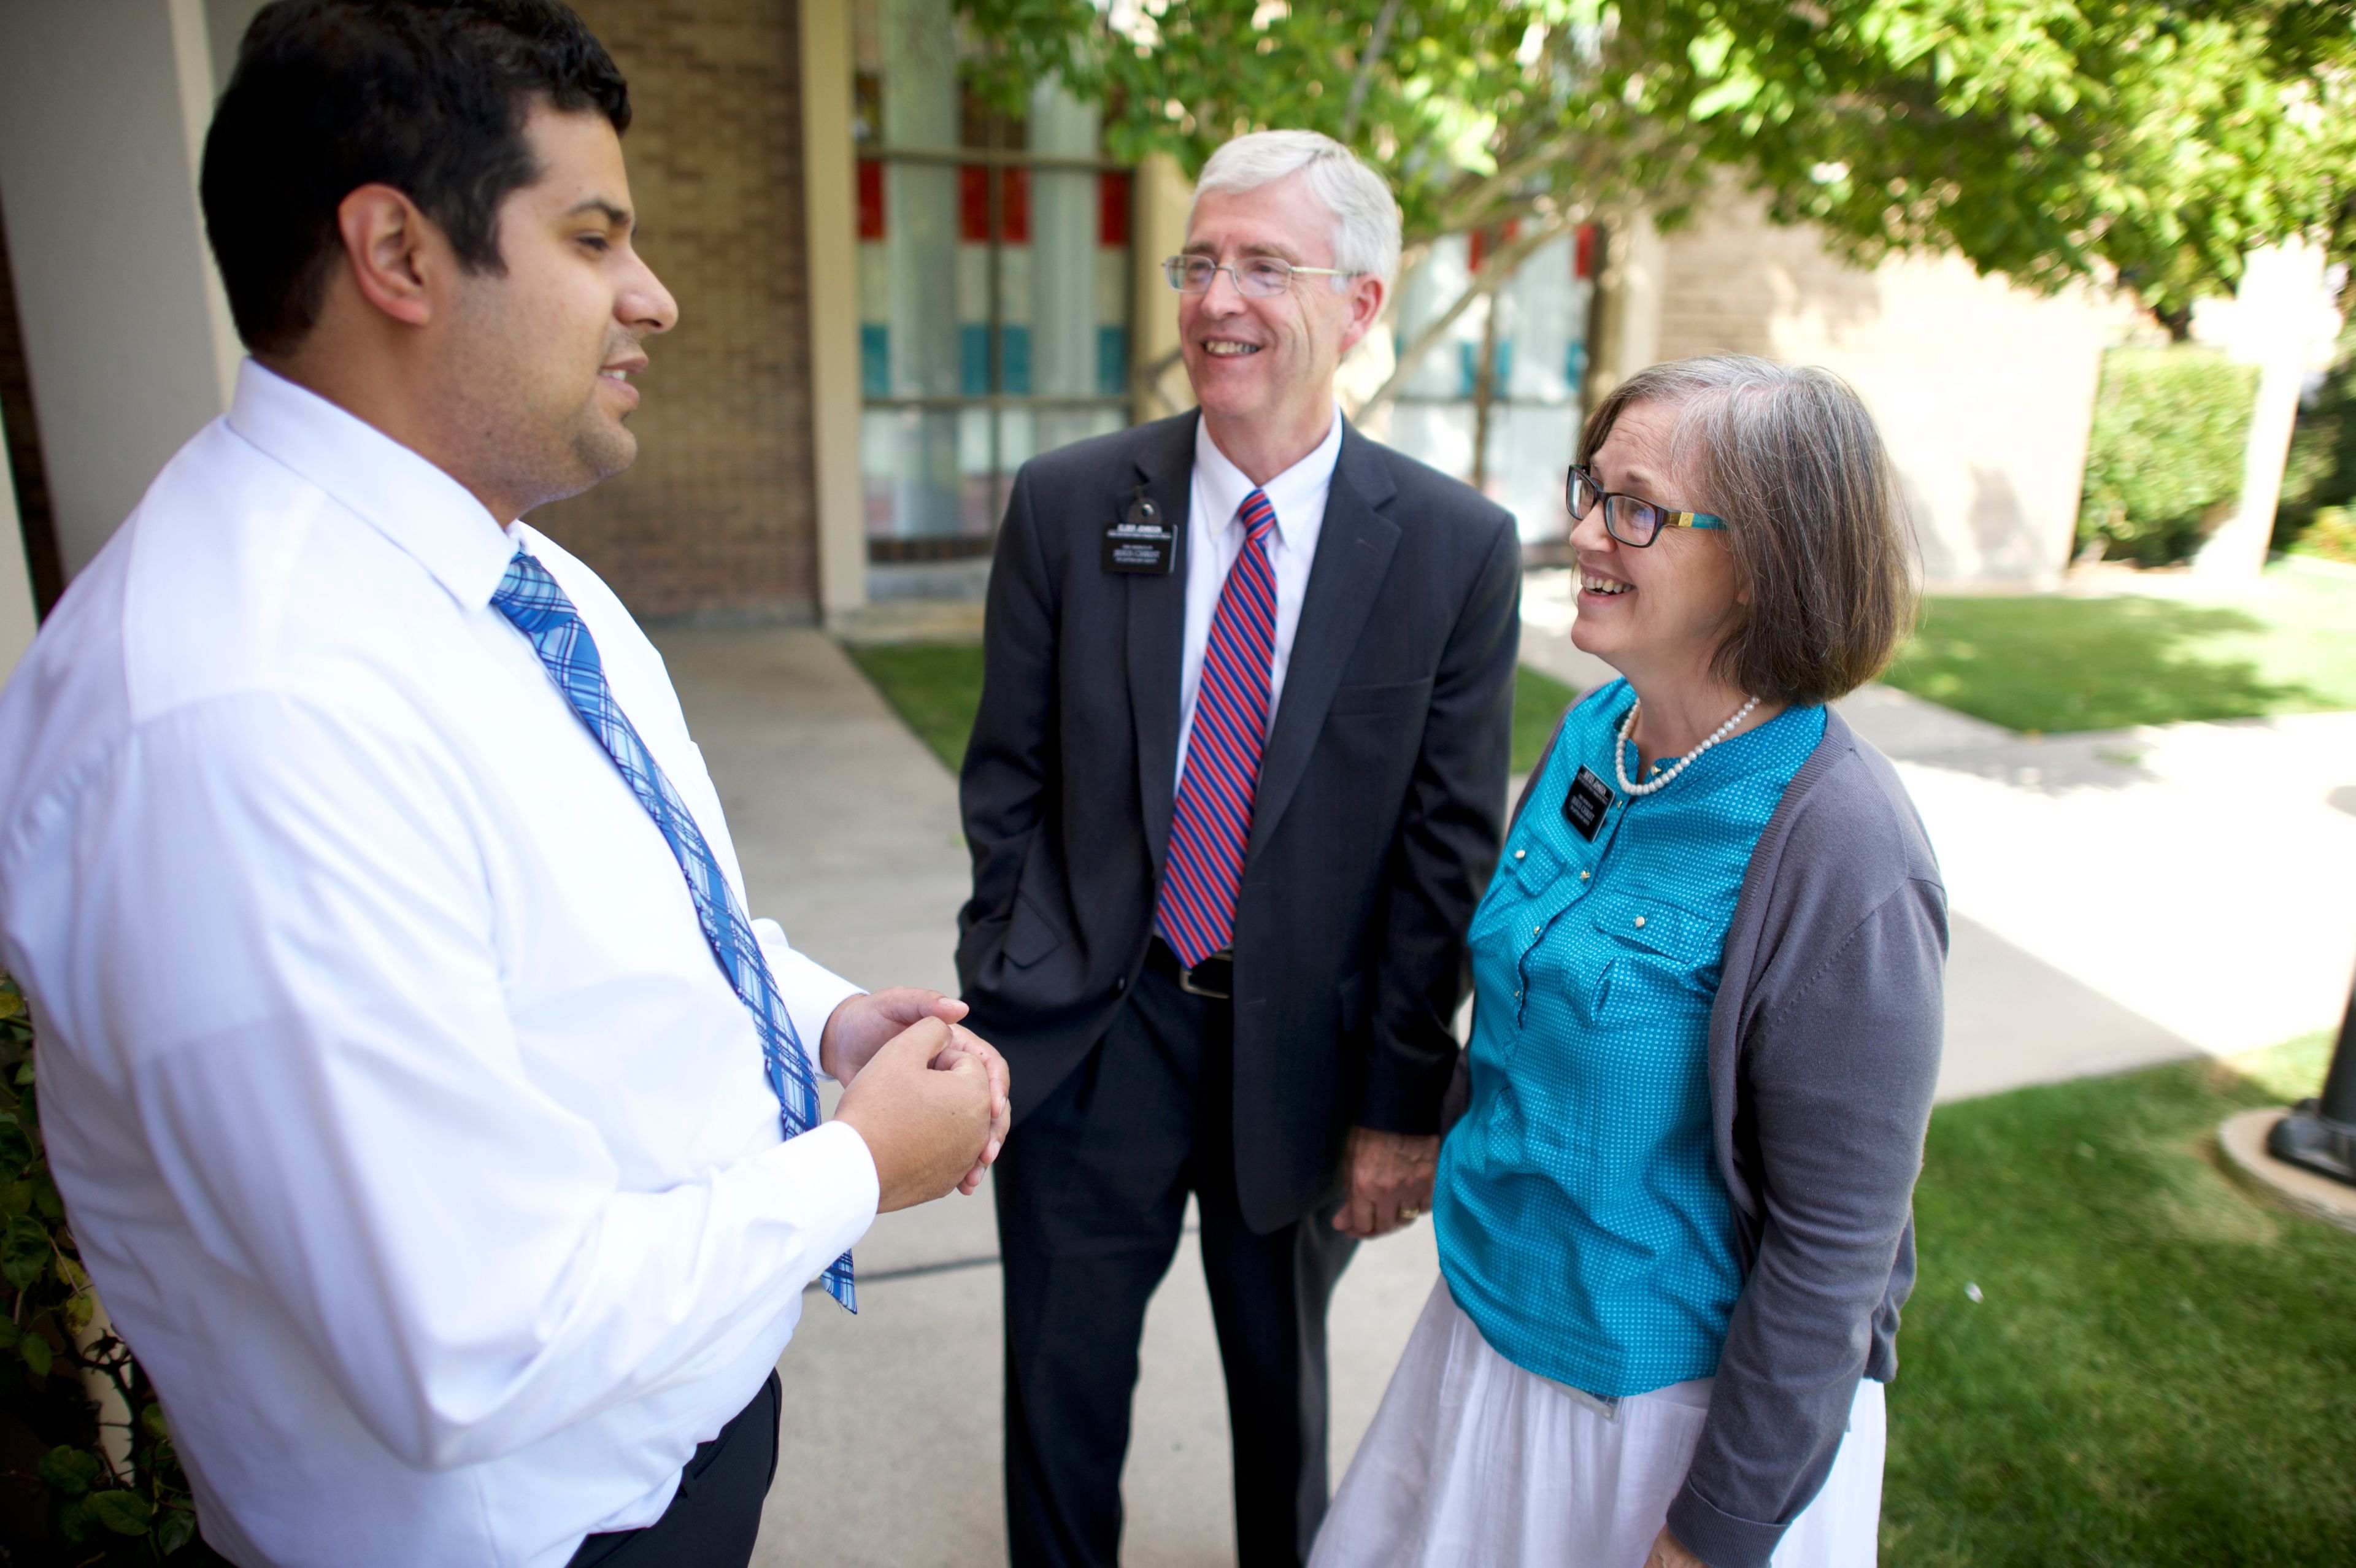 A senior missionary couple standing and talking with a man.